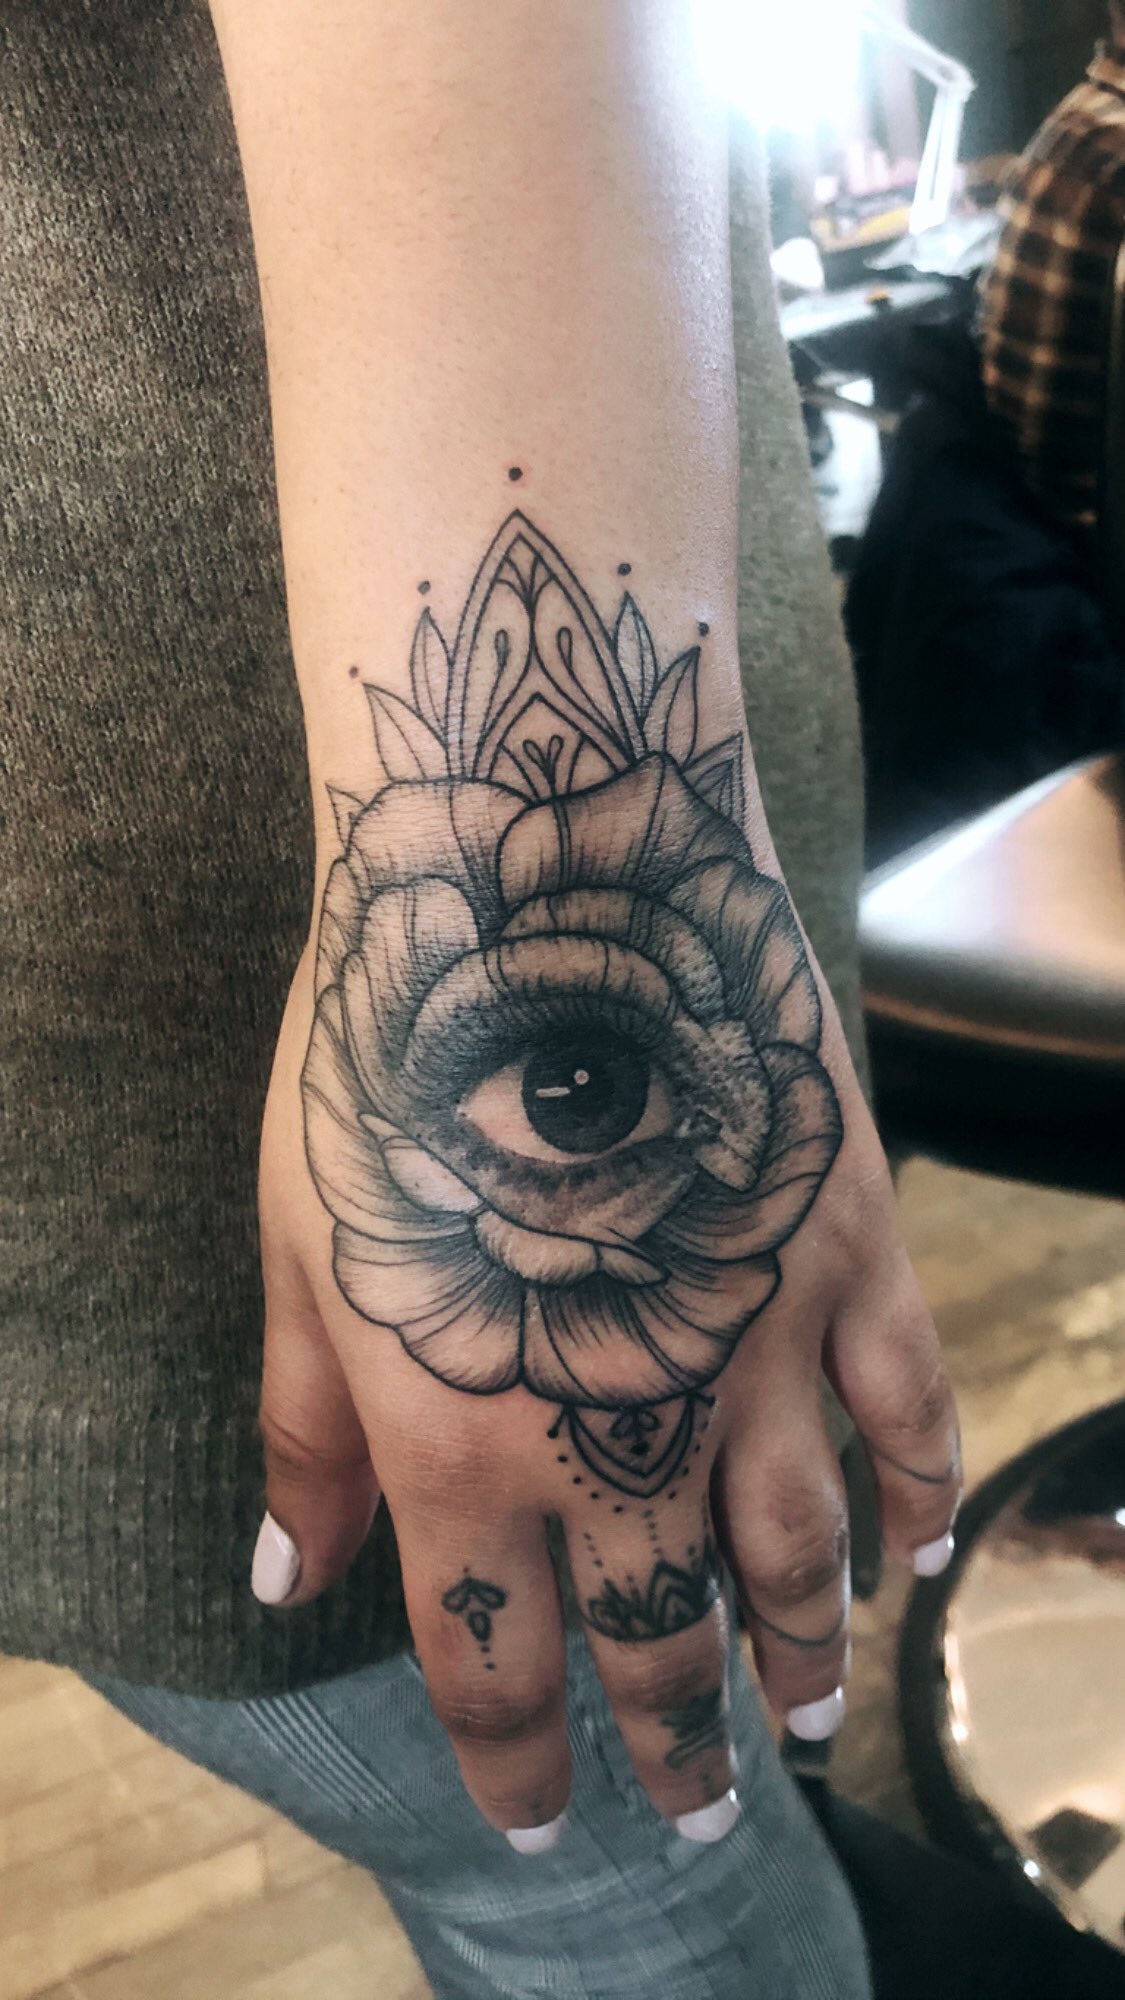 Eye clock rose  done 7 months ago today  rtattoo